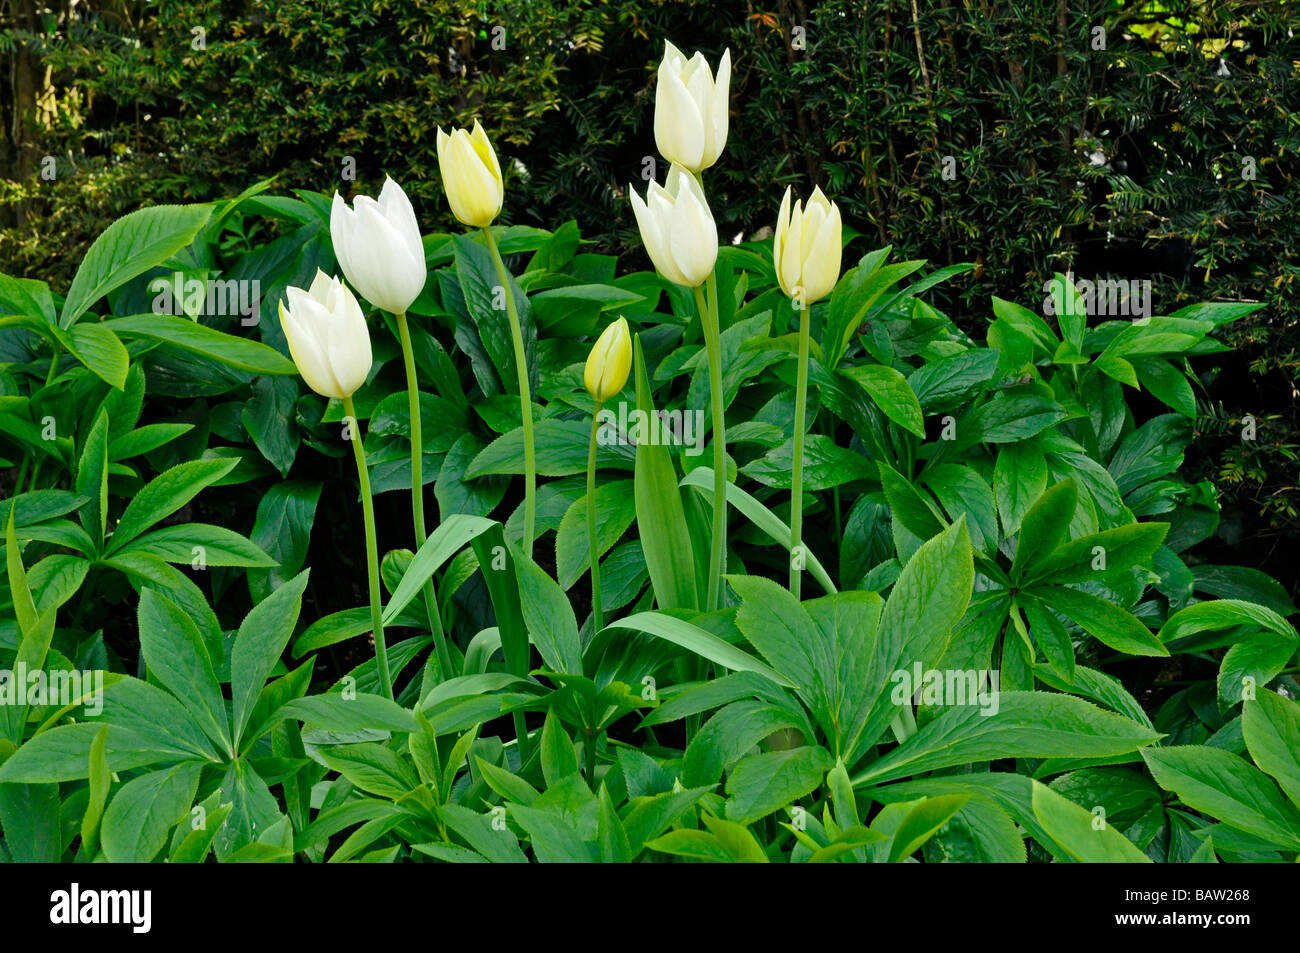 White Tulips with green foliage against a dark Yew hedge background. Stock Photo